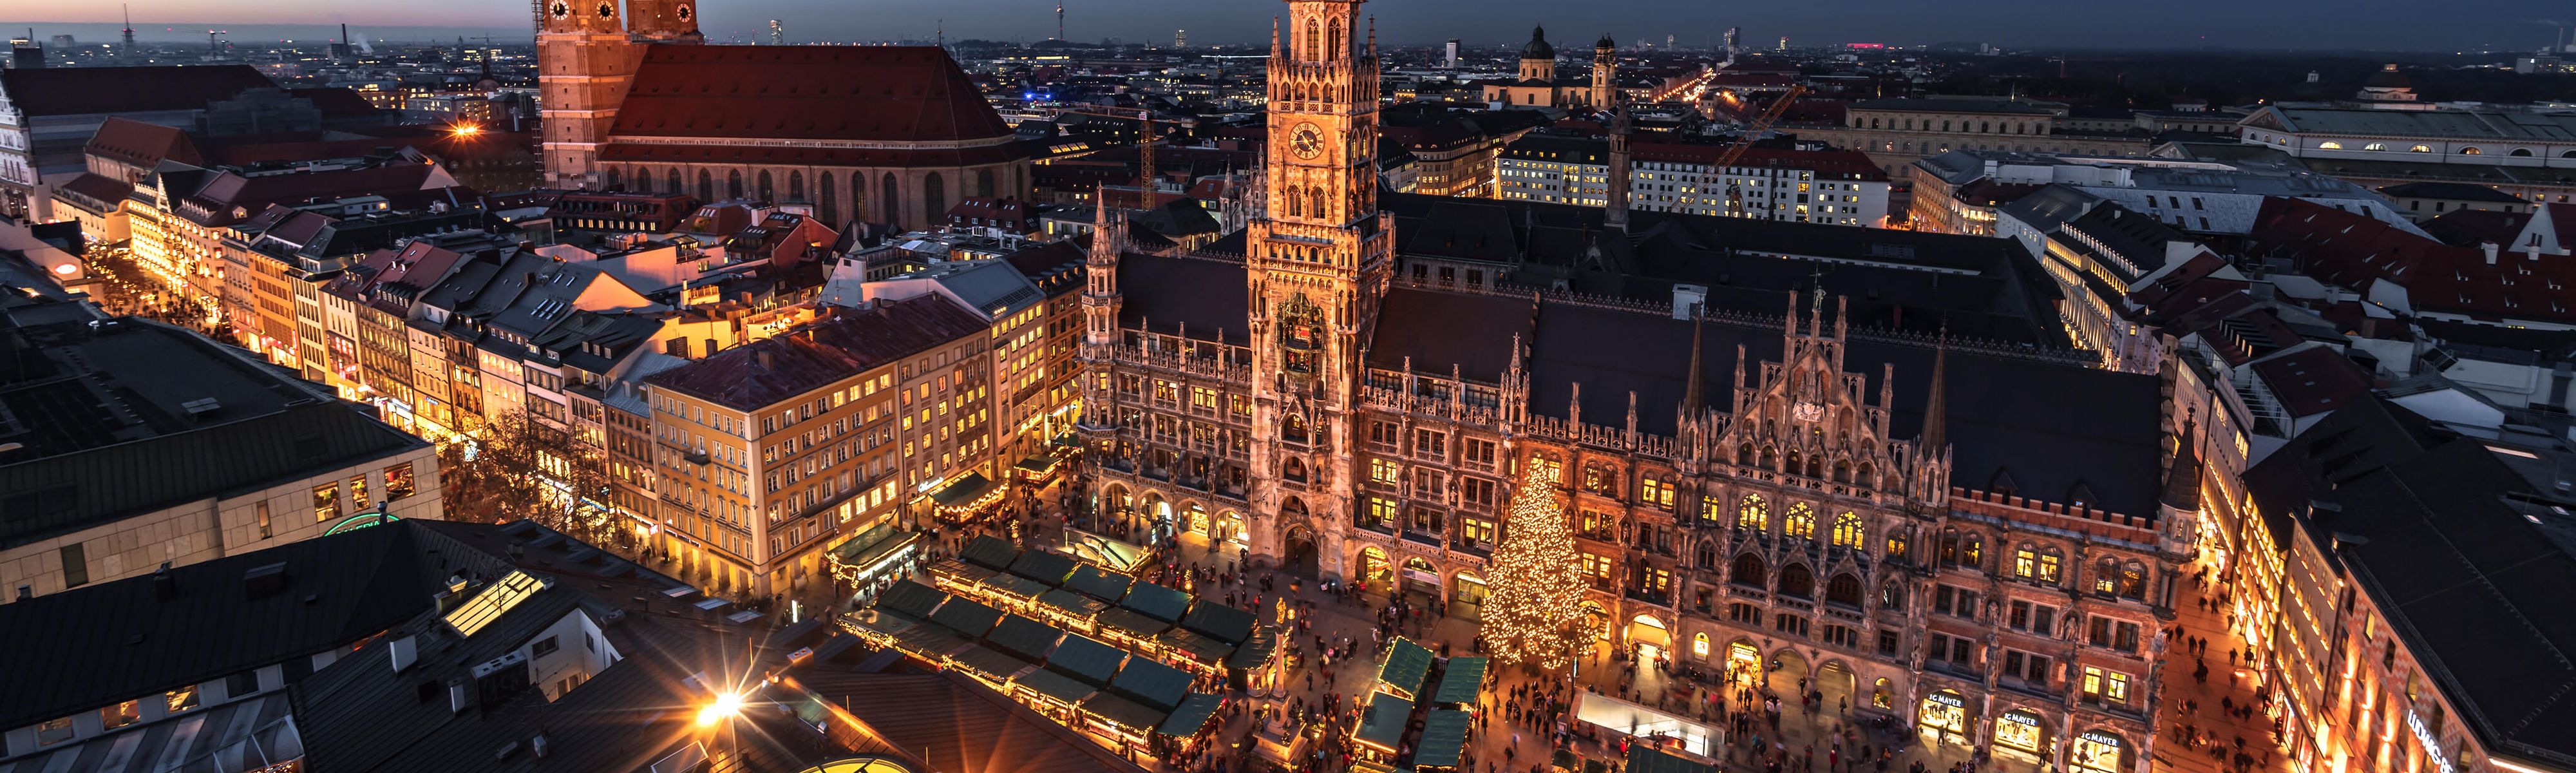 Marienplatz lit up at night in munich germany during the winter time